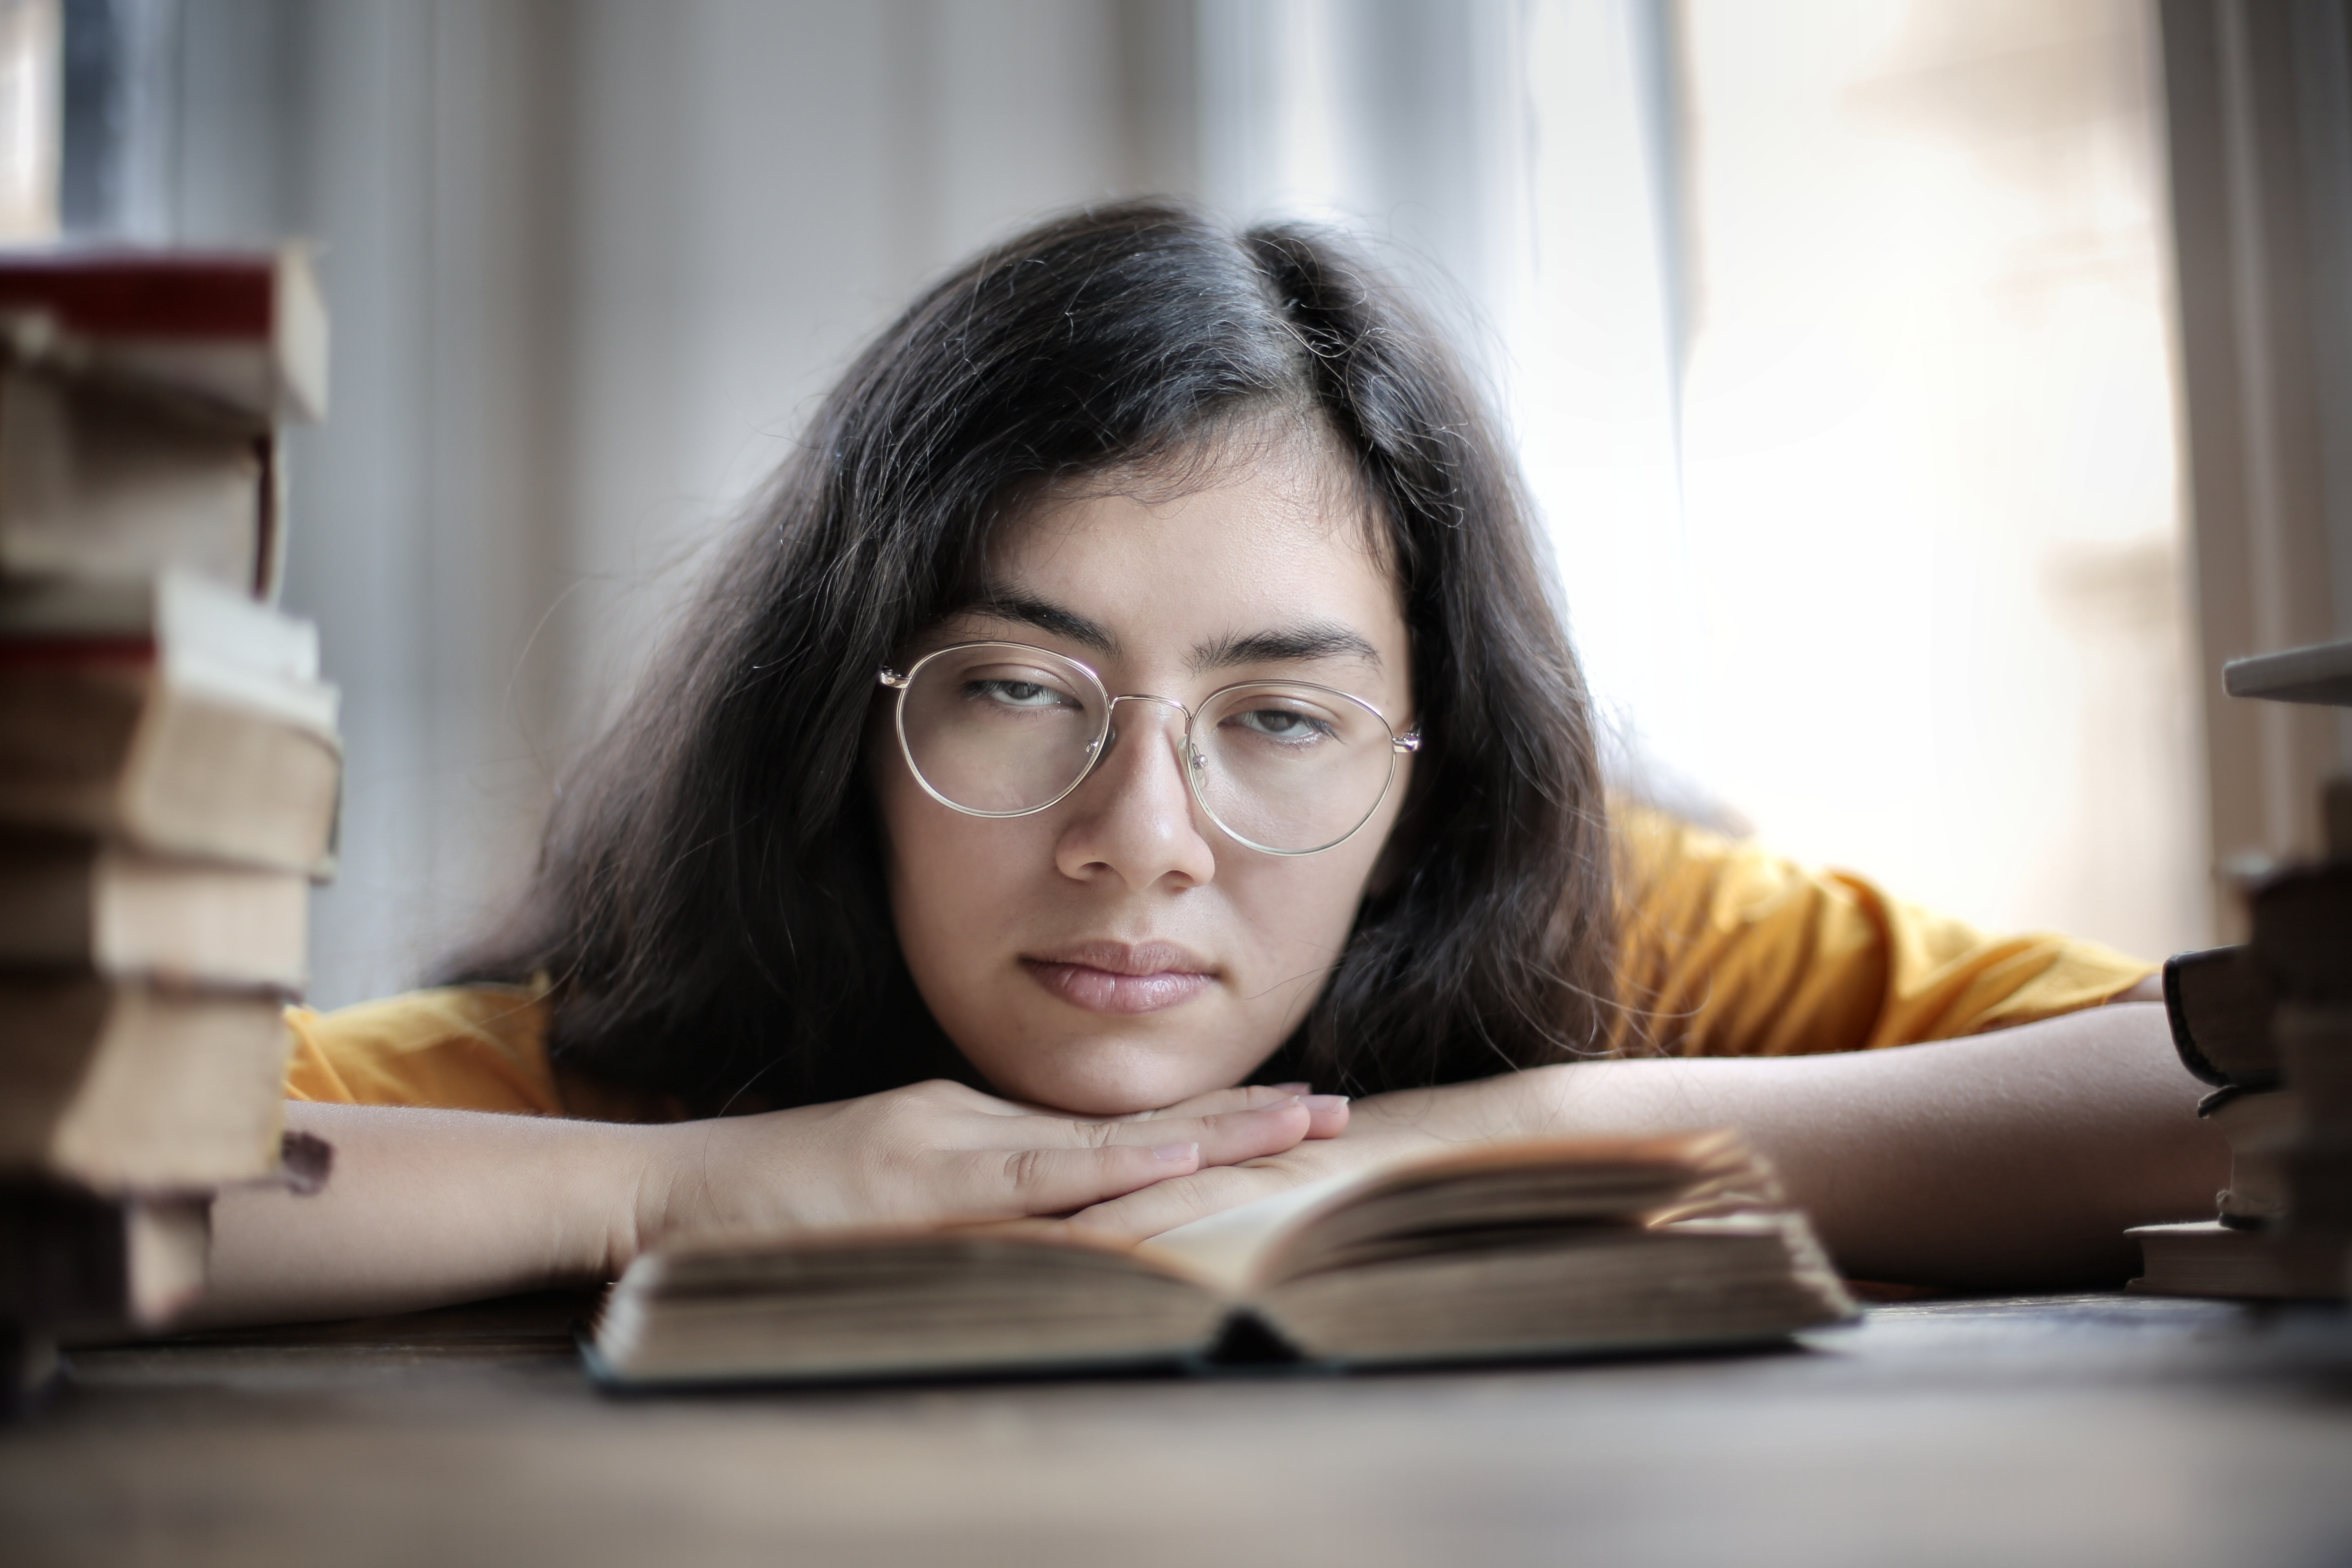 A woman with long hair and glasses dozes off on a book